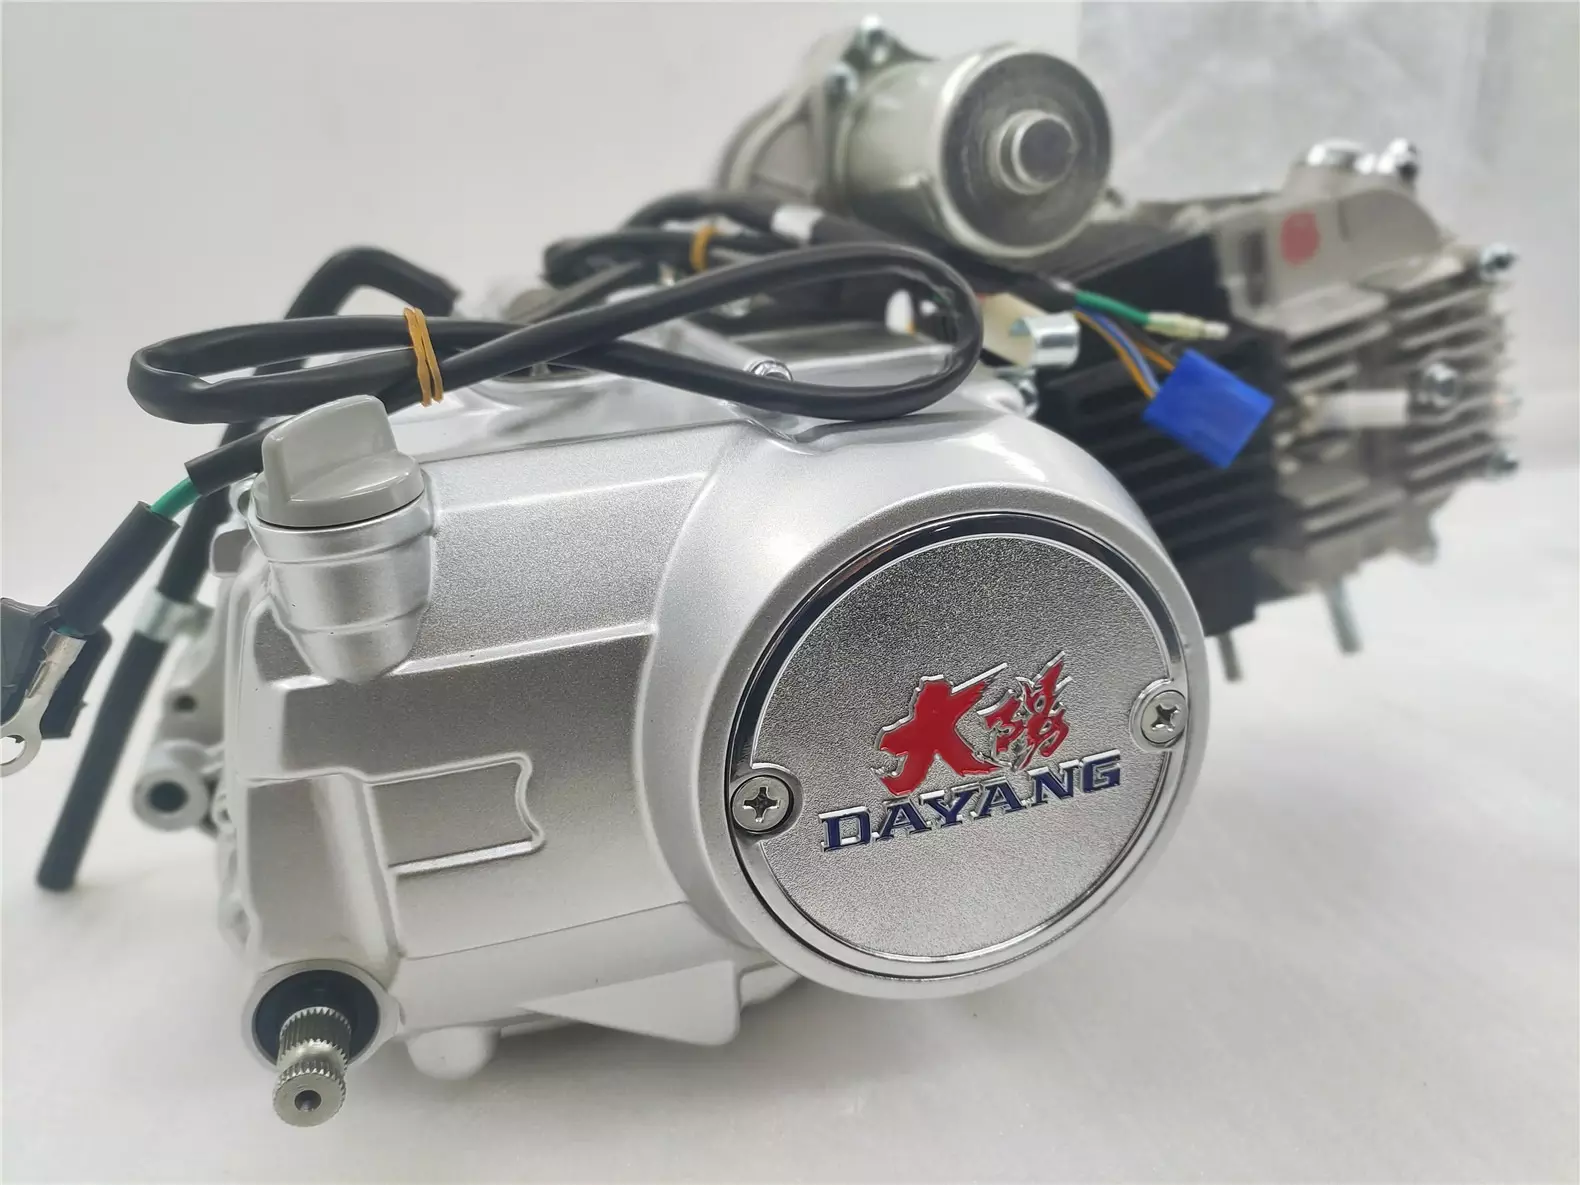 LIFAN 125CC Nature Water-colled Engine Motorcycle Three Wheel Cargo Tricycle Engine Assembly Sliver DAYANG 4 Stroke 1 Cylinder